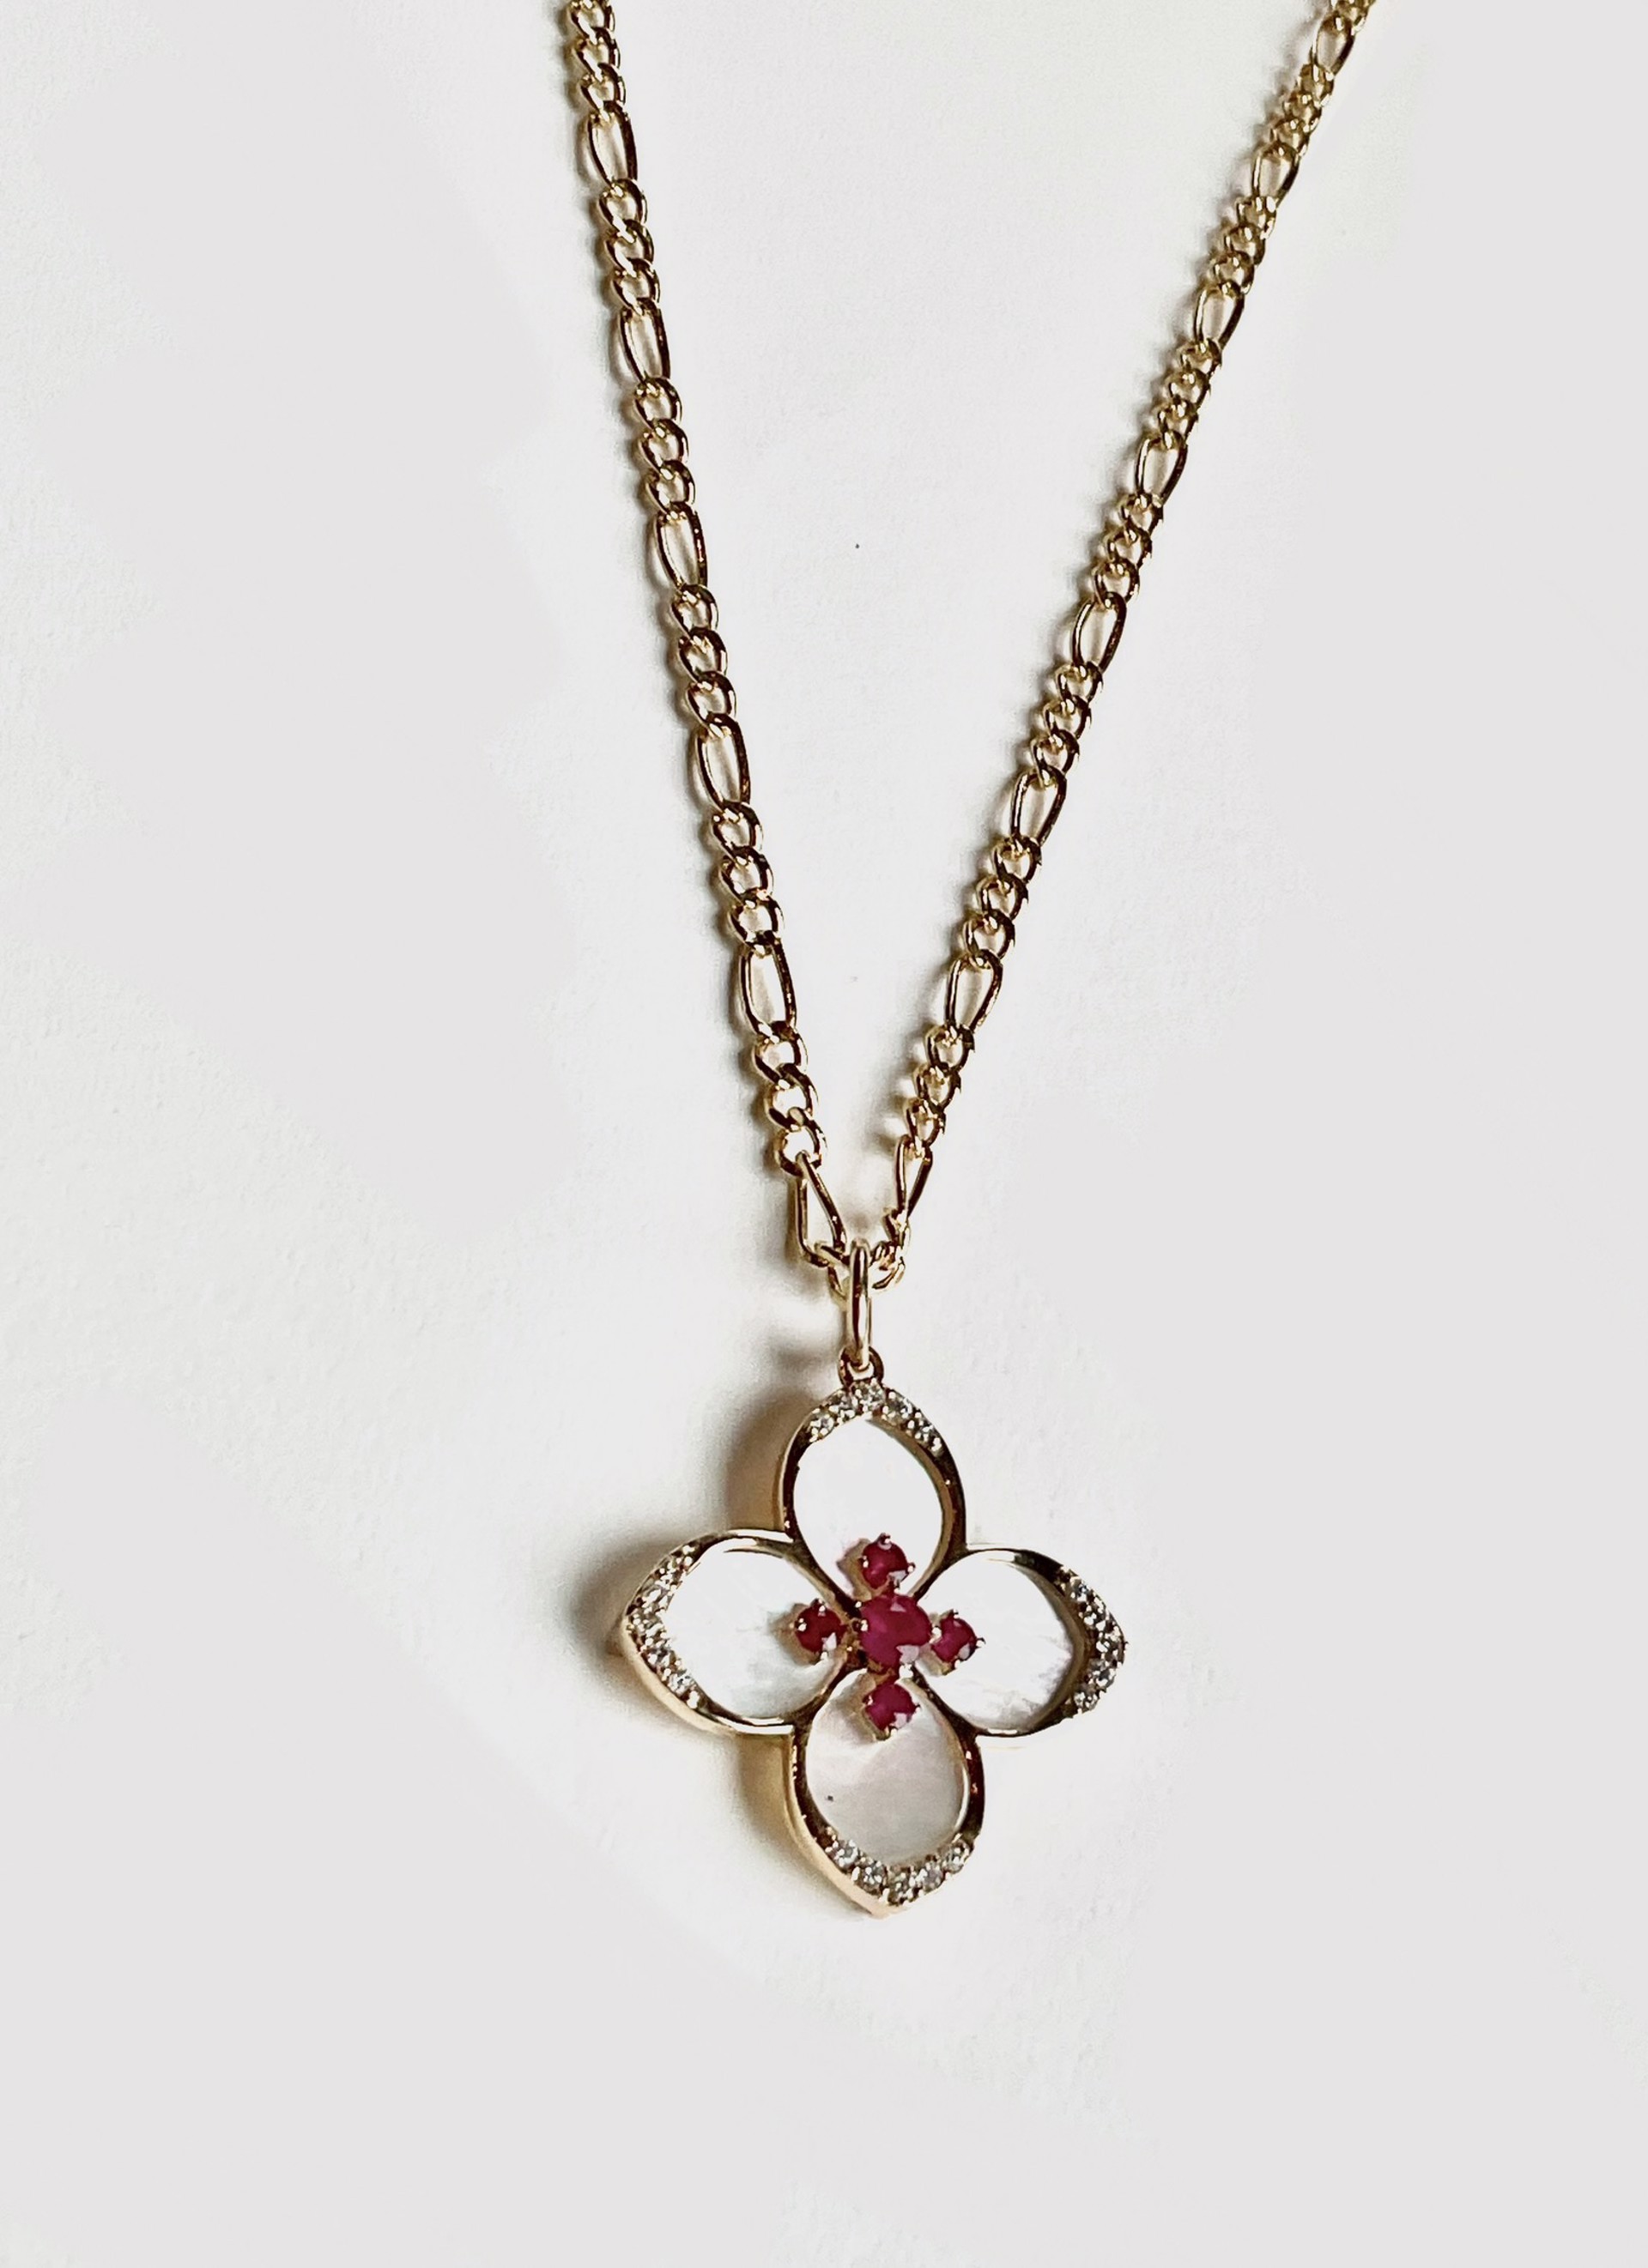 KB-N100 14K Gold Cable Chain with MOP Ruby Clover Pendant by Karen Birchmier